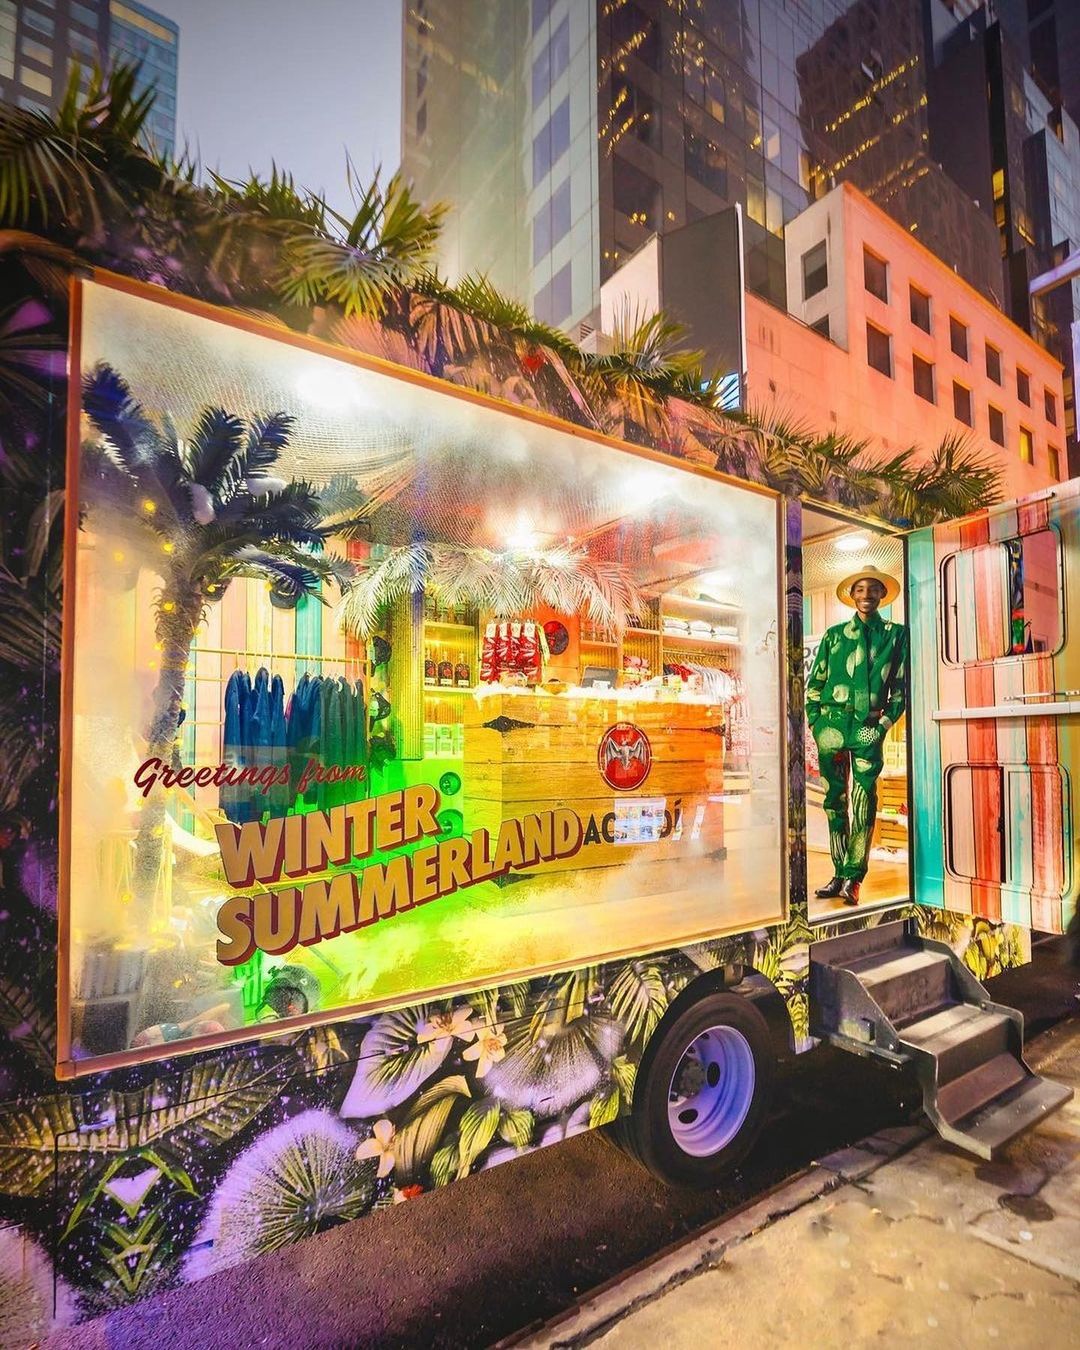 Bacardi Holiday-Themed Pop-Up In NYC